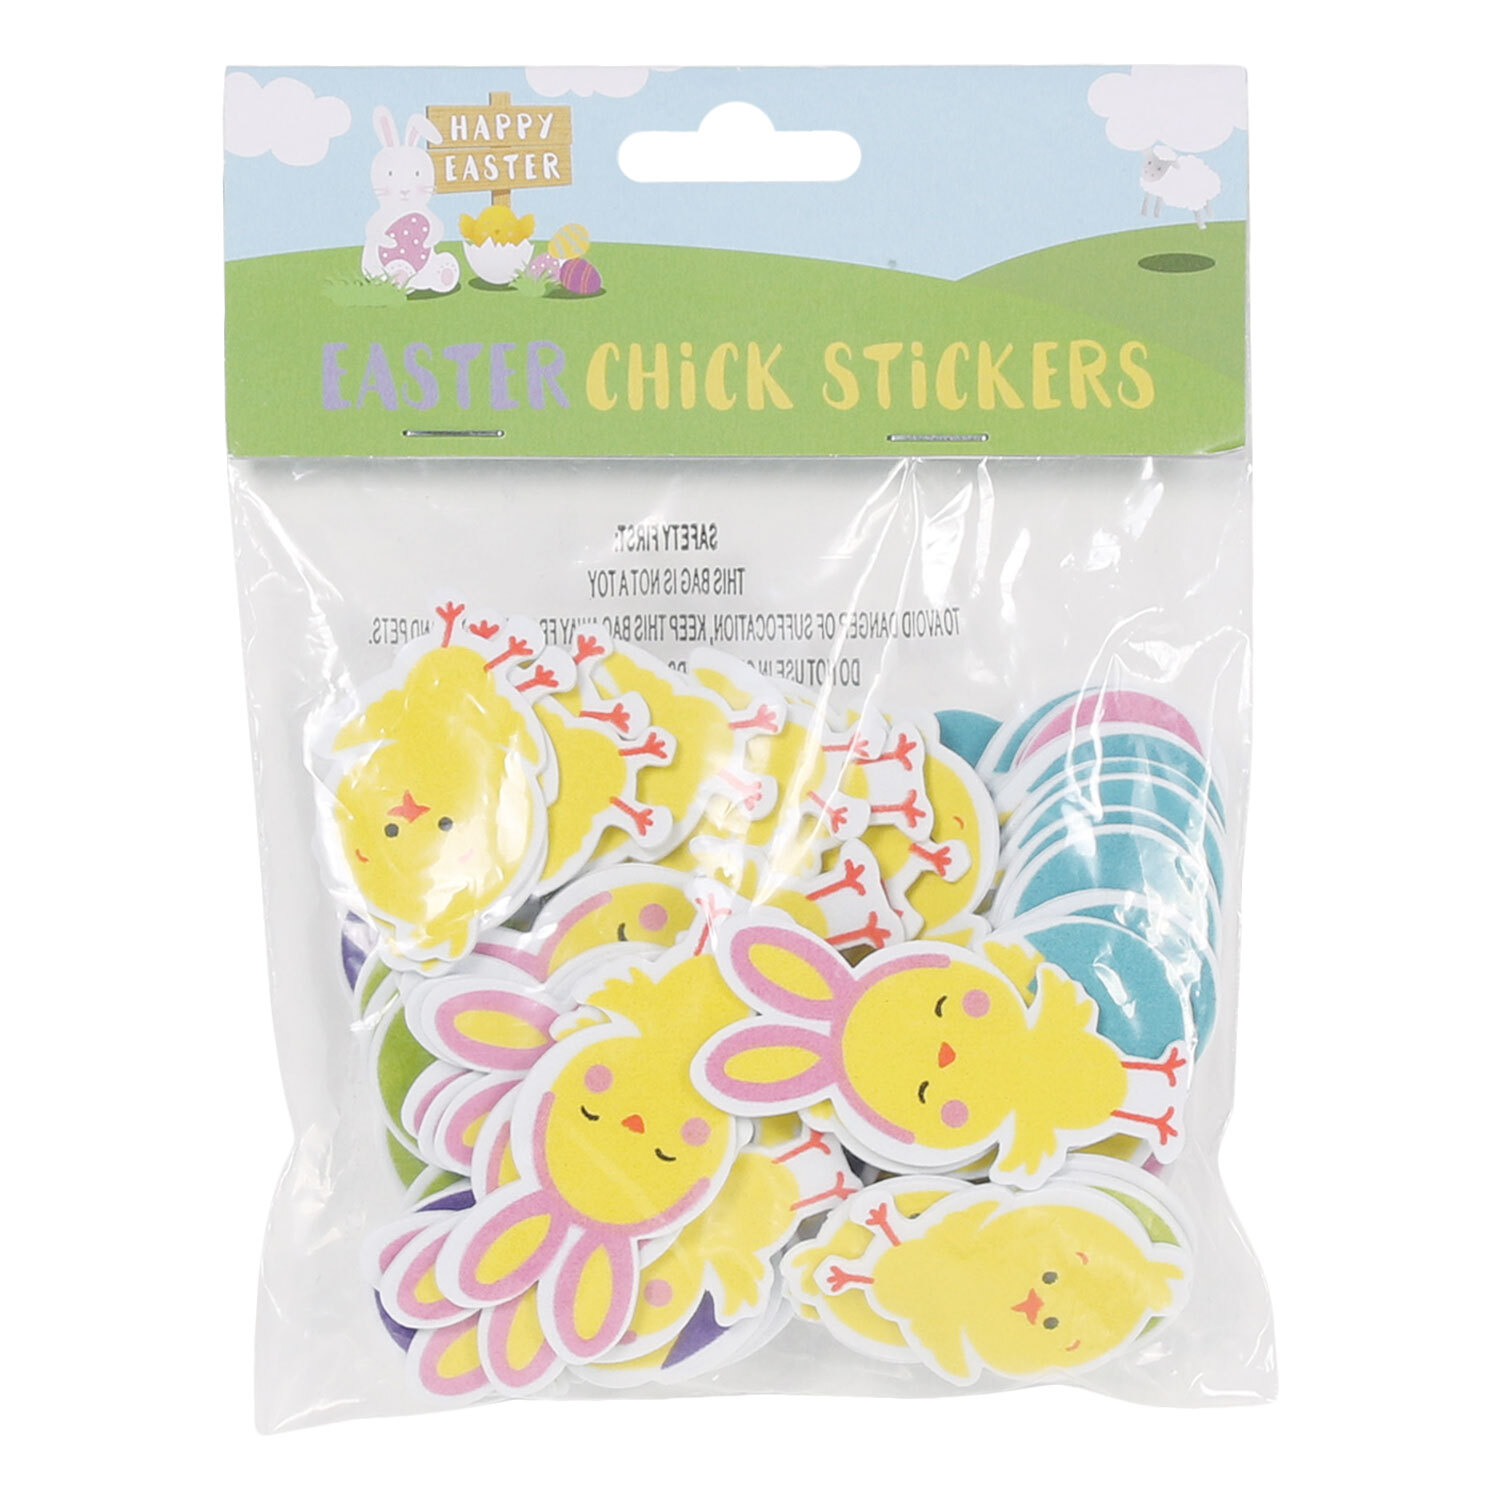 Easter Chick Stickers Image